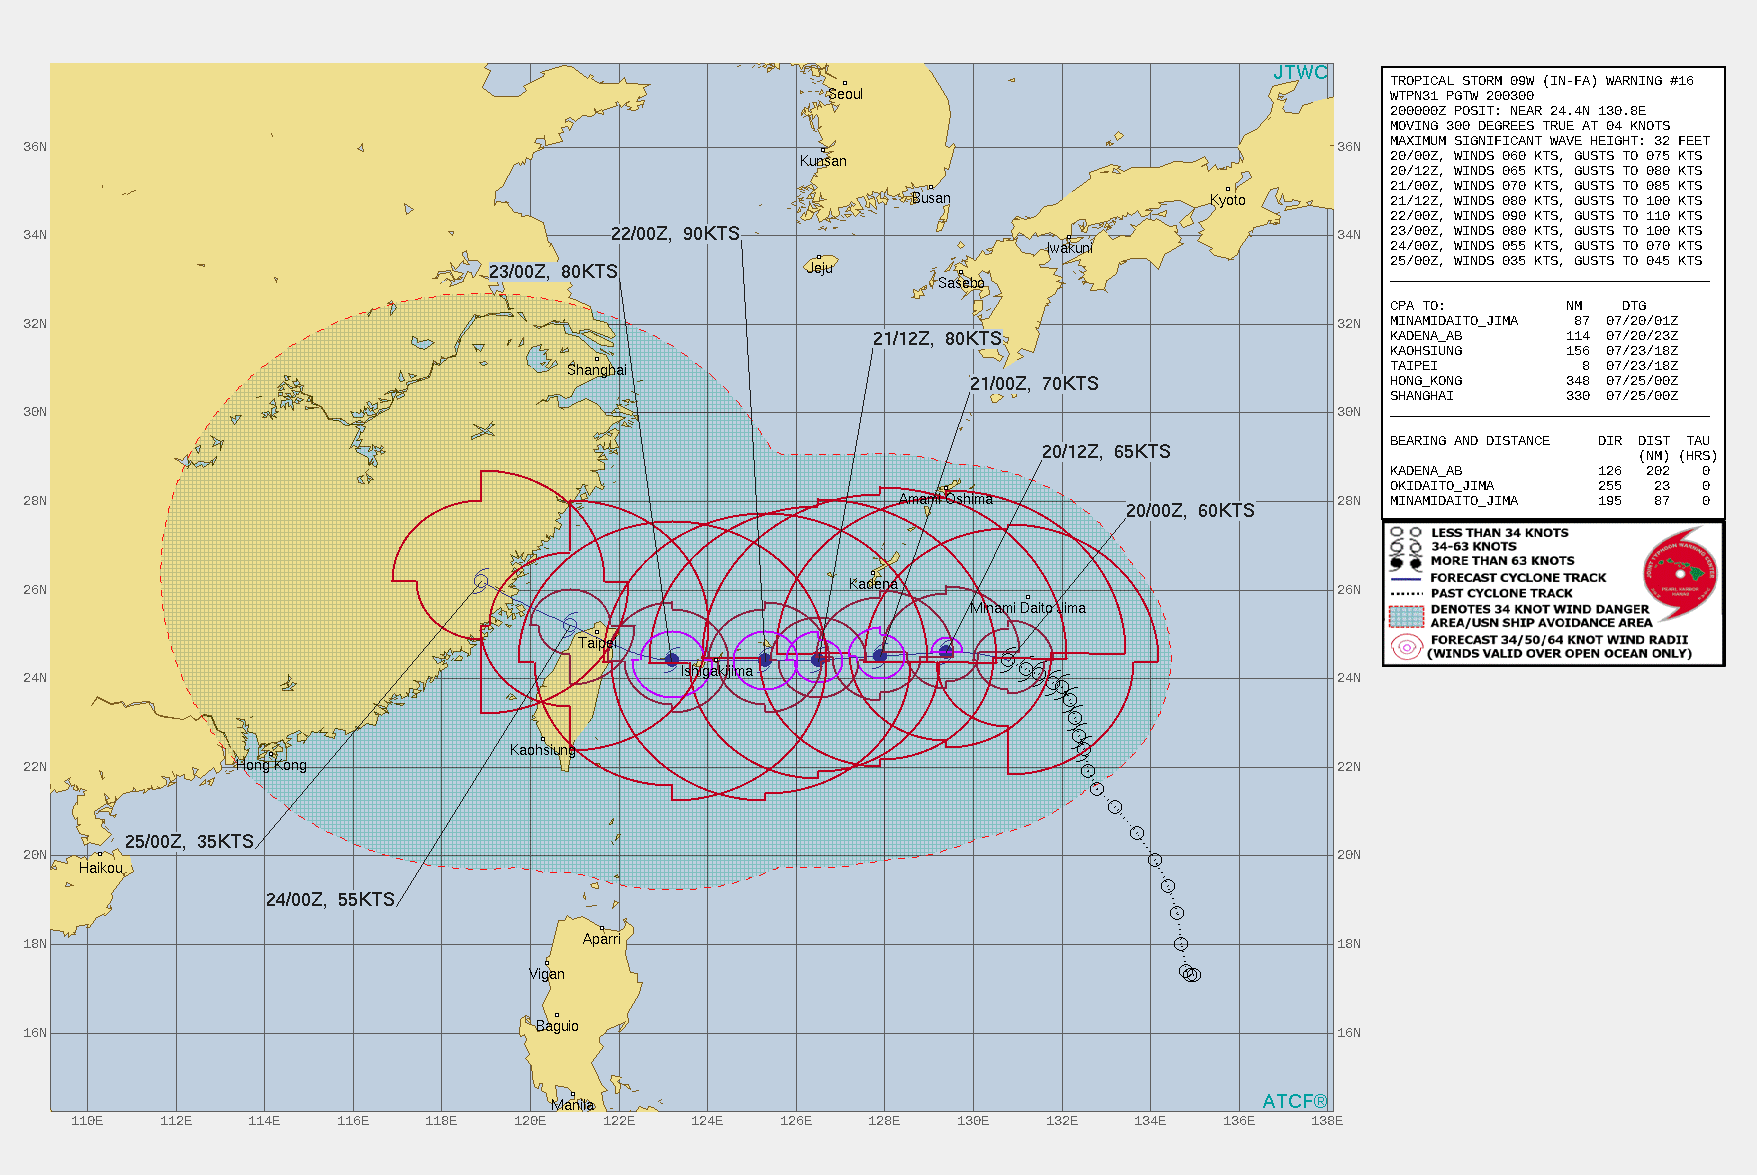 TS 09W(IN-FA). WARNING 16 ISSUED AT 20/03UTC.THERE ARE NO SIGNIFICANT CHANGES TO THE FORECAST FROM THE PREVIOUS WARNING.  FORECAST DISCUSSION: TS 09W WILL TRACK MORE WESTWARD ALONG THE SOUTHERN PERIPHERY OF THE SUBTROPICAL RIDGE(STR) TOWARD NORTHERN TAIWAN. AFTER 72H, IT WILL TURN MORE NORTHWESTWARD, NEAR TAIPEI, TAIWAN, AS IT BEGINS TO ROUND THE WESTERN EDGE OF THE STR, THEN MAKE A FINAL LANDFALL OVER SOUTHEAST CHINA NEAR FUZHOU NEAR 108H. THE FAVORABLE ENVIRONMENT WILL PROMOTE A STEADY INTENSIFICATION TO A PEAK OF 90KTS/CAT 2 AROUND 48H. AFTERWARD, INCREASING VERTICAL WIND SHEAR AND SUBSIDENCE ASSOCIATED WITH A MID-LATITUDE TROUGH TO THE NORTHWEST WILL GRADUALLY WEAKEN THE SYSTEM. AFTER LANDFALL IN CHINA, LAND INTERACTION WITH THE RUGGED TERRAIN WILL RAPIDLY ERODE THE SYSTTEM DOWN TO 35KNOTS BY 120H.